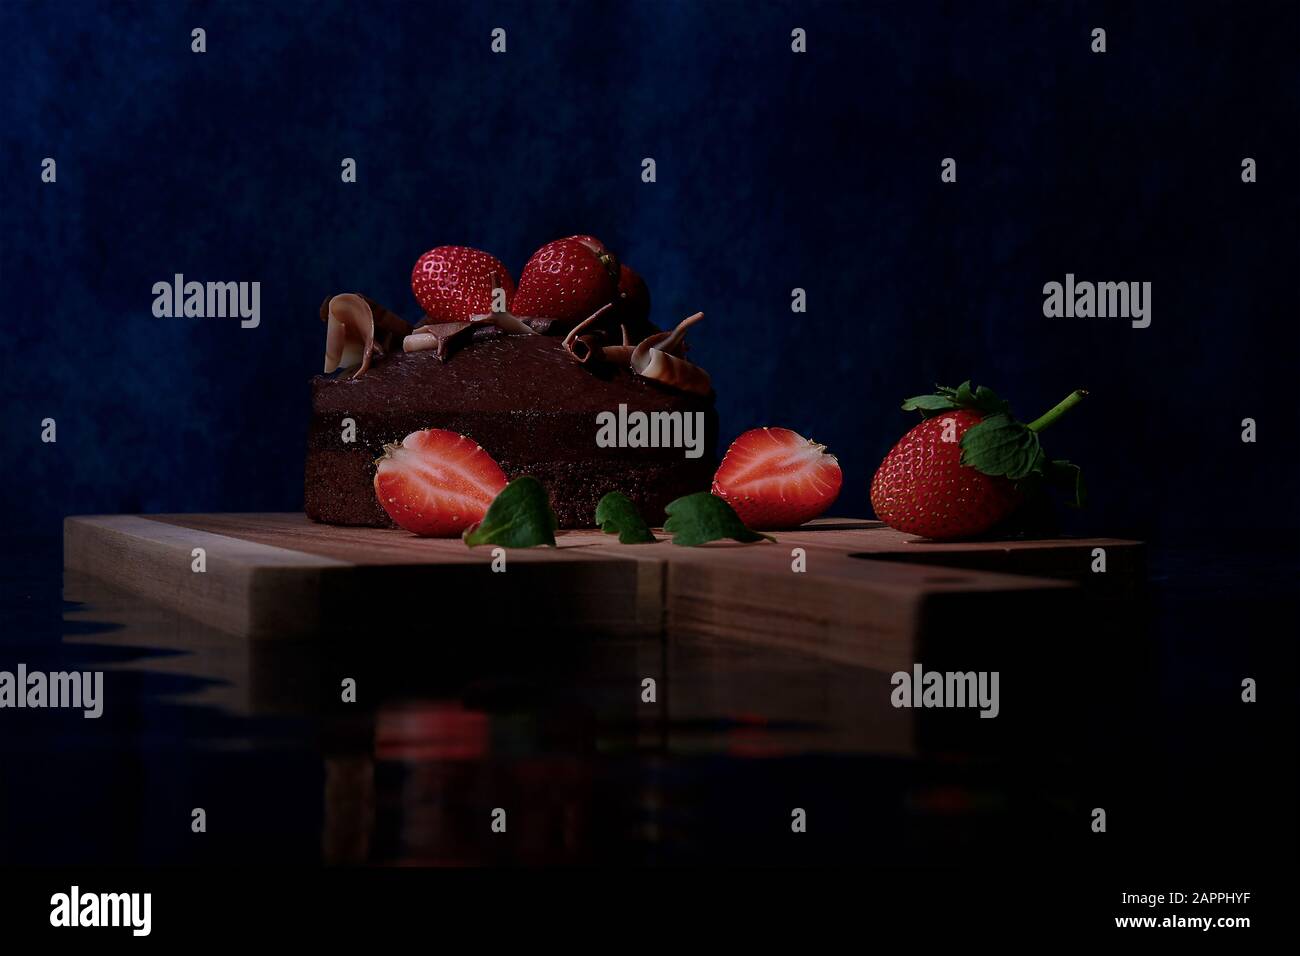 chocolate cake presented with strawberries on a wooden board showing a water effect ripple reflection Stock Photo